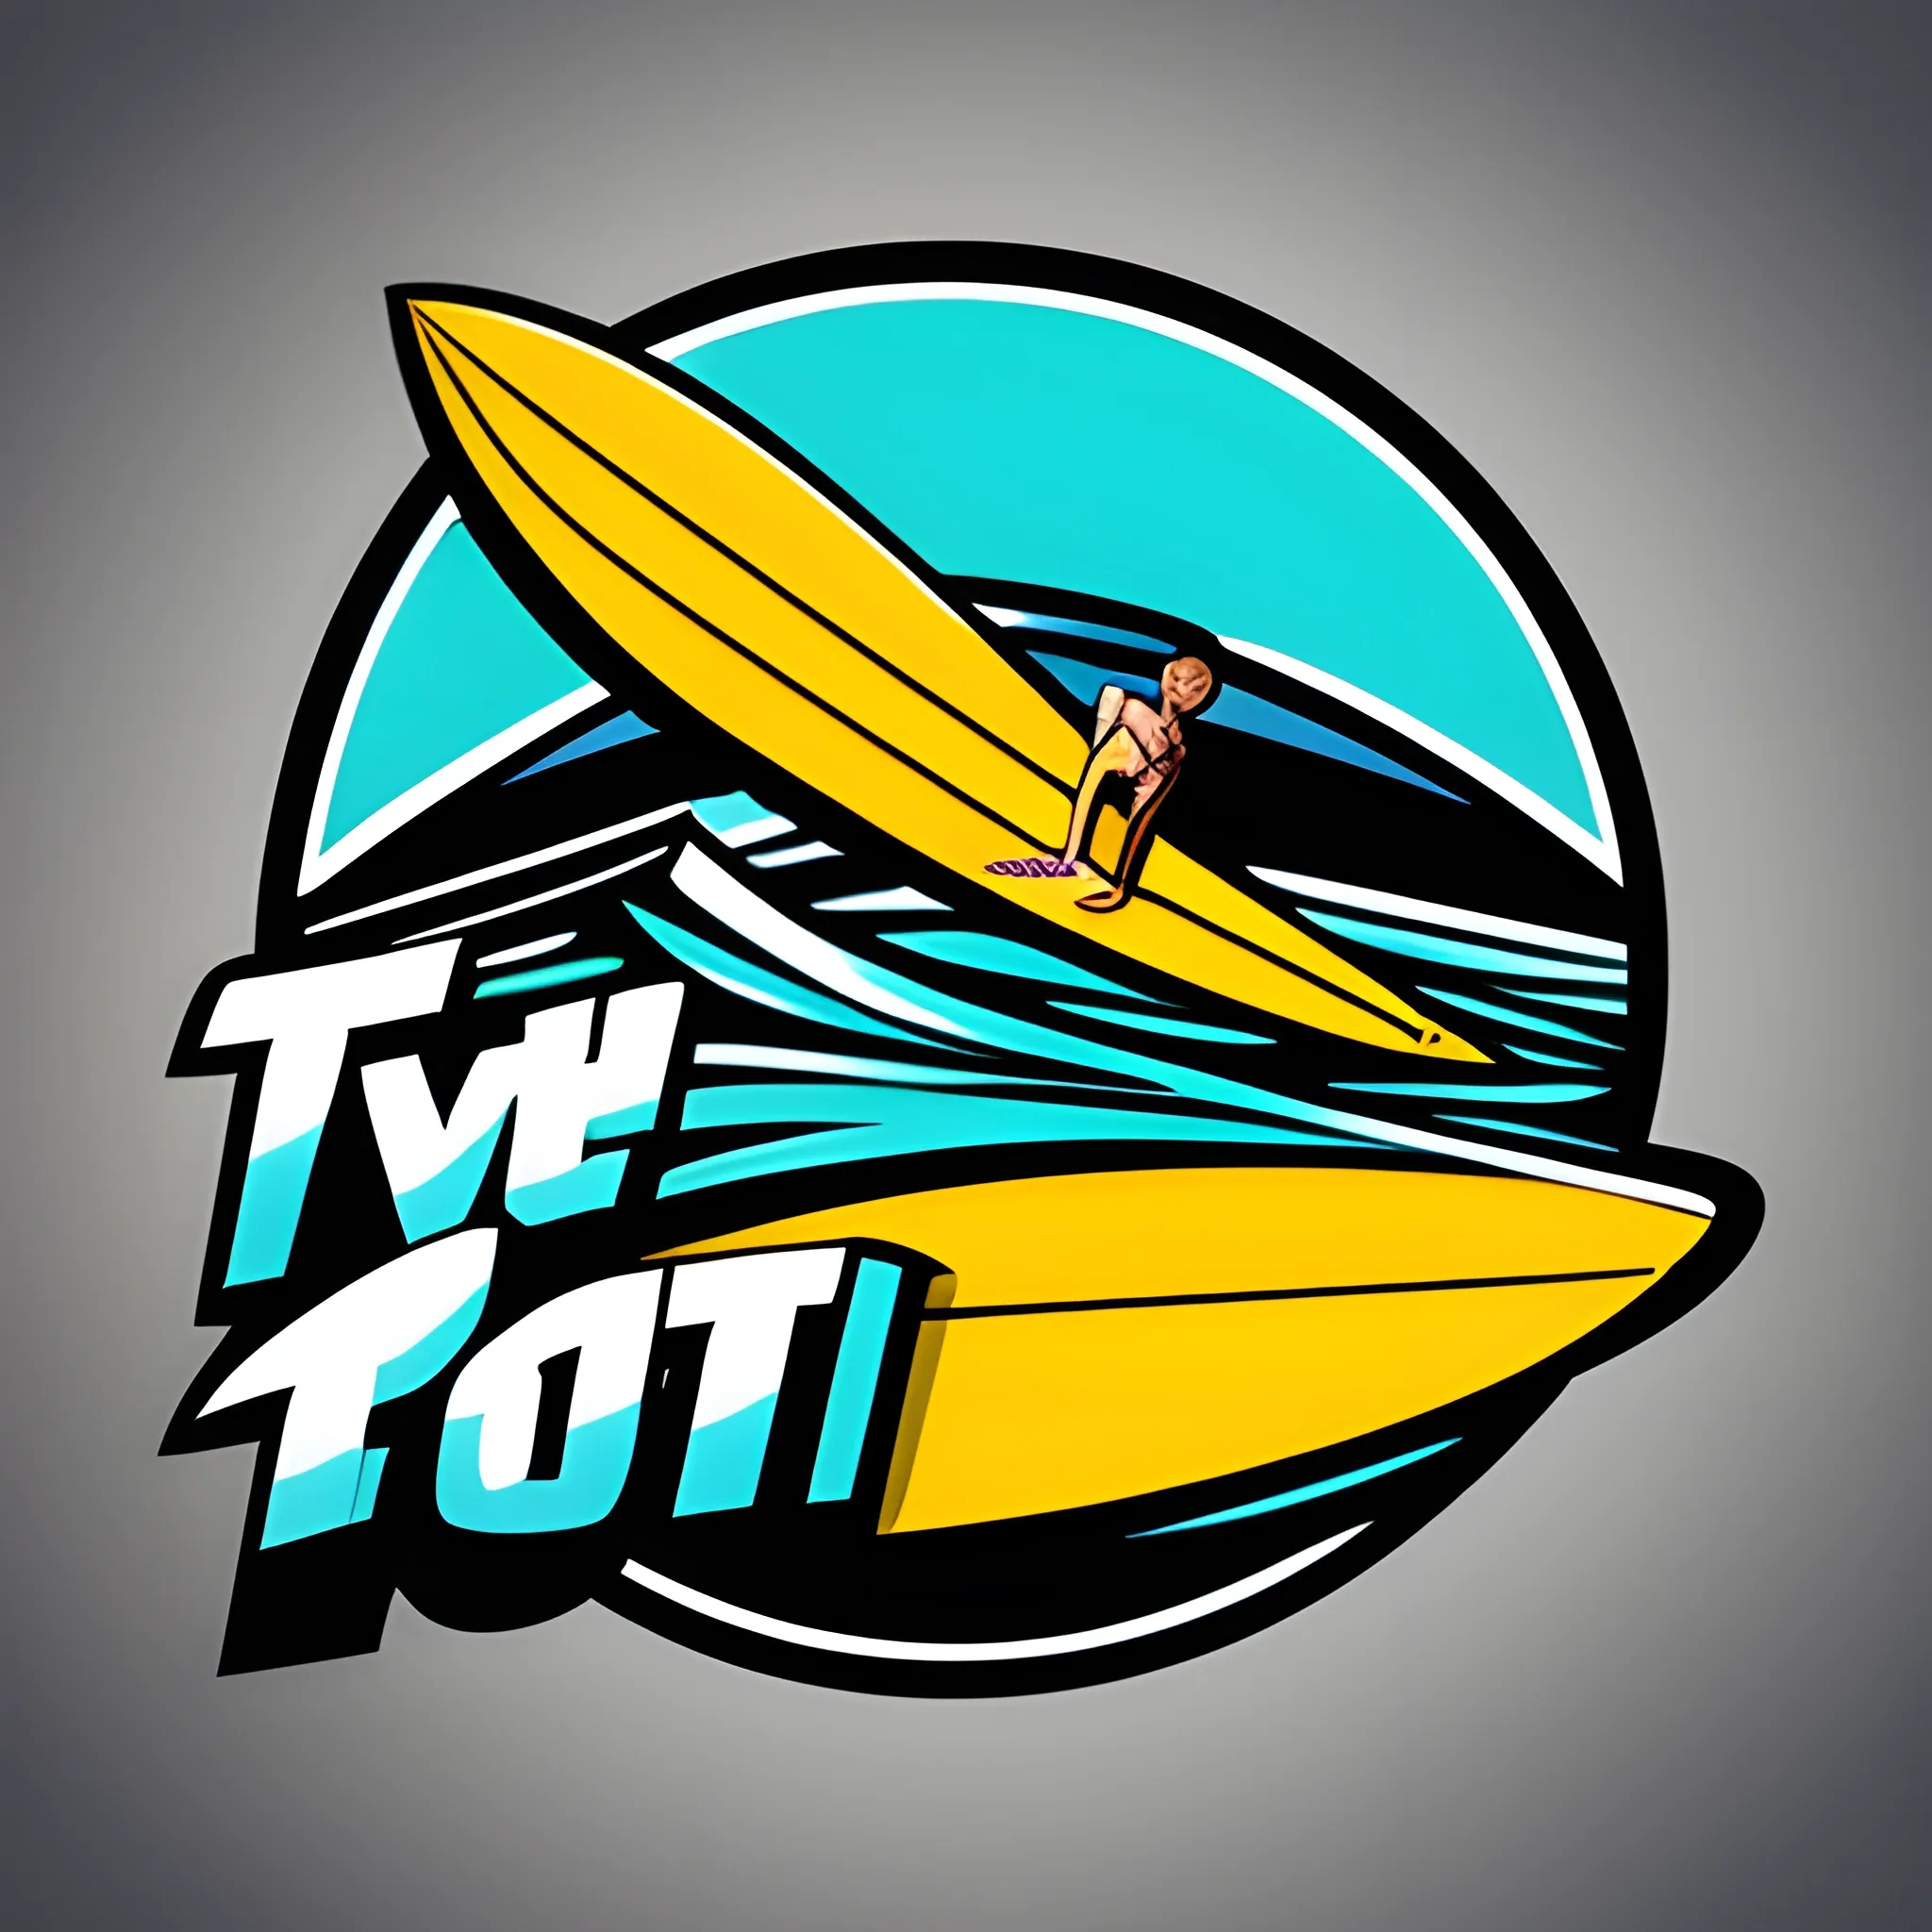 
SURFER LOGO FOR T-SHIT MODERN WITH A LOT OF LIVE COLOURS WITHOUT TEXT AND VECTOR
, Cartoon